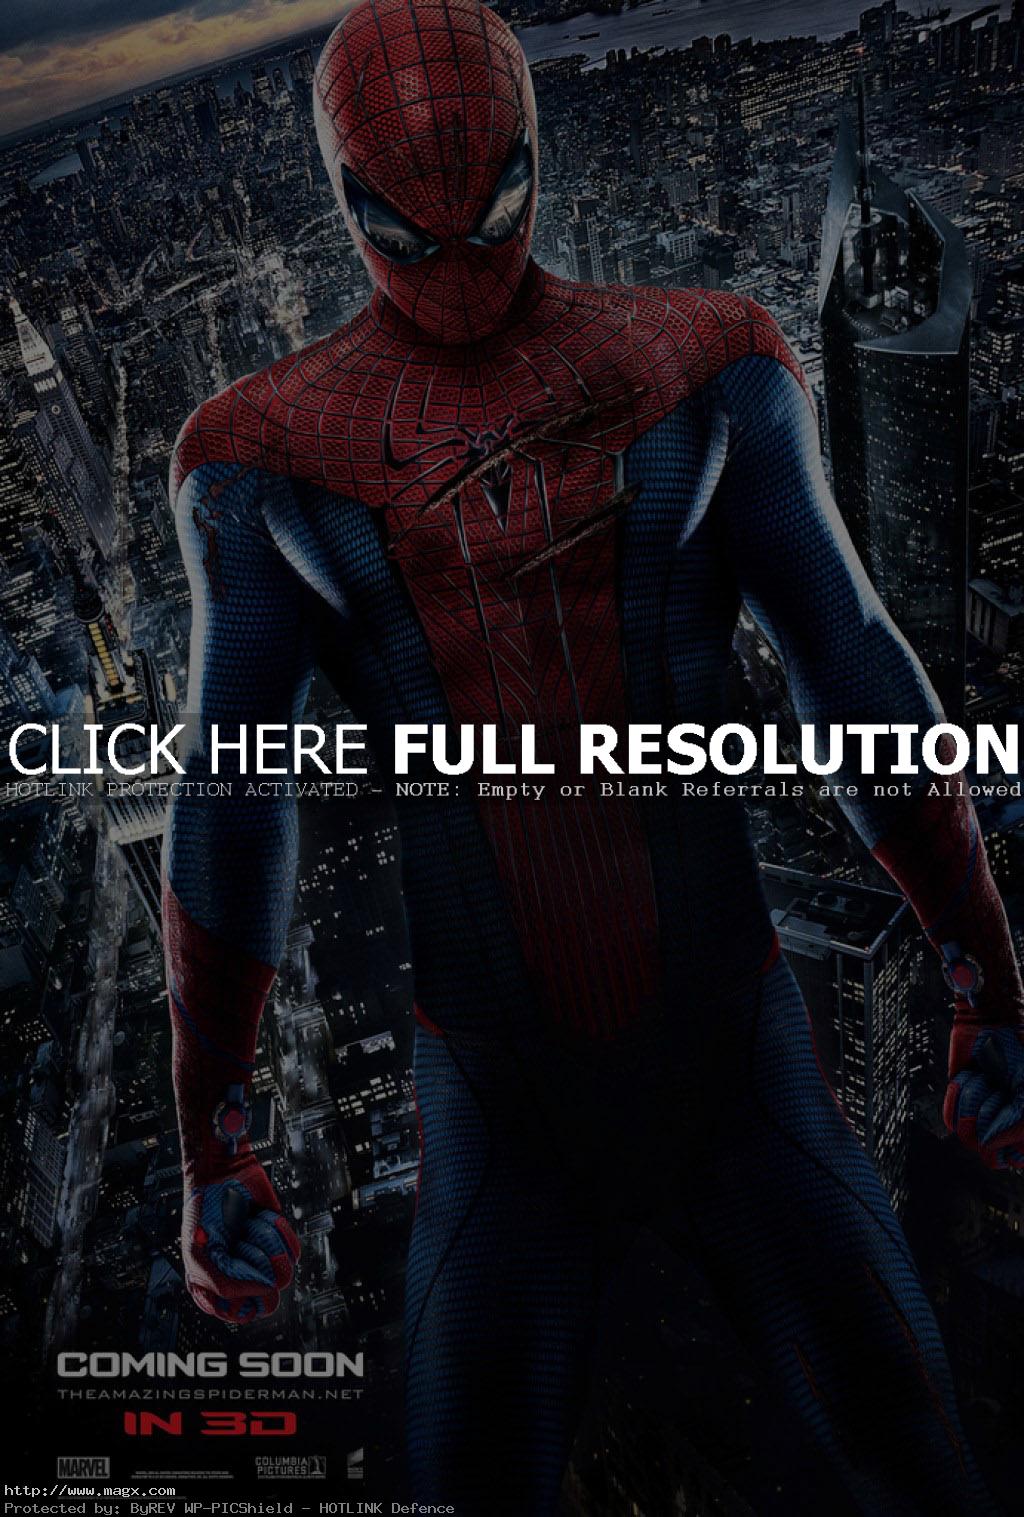 amazing spider man1 The Amazing Spiderman is Back in 3D